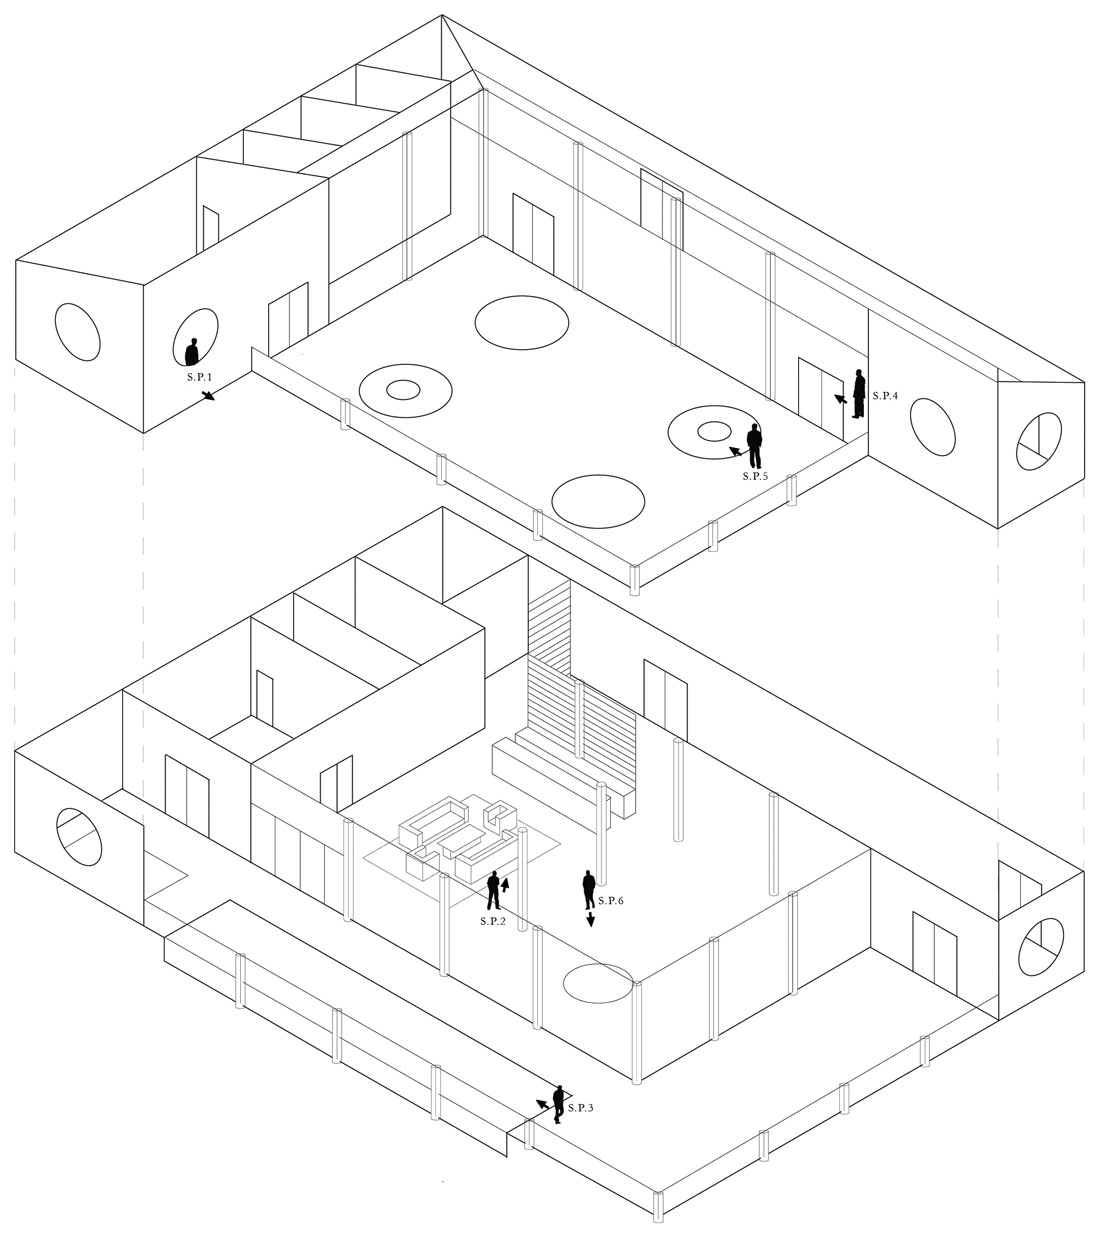 Penthouse isometric drawing Ross Clements Ross Clements